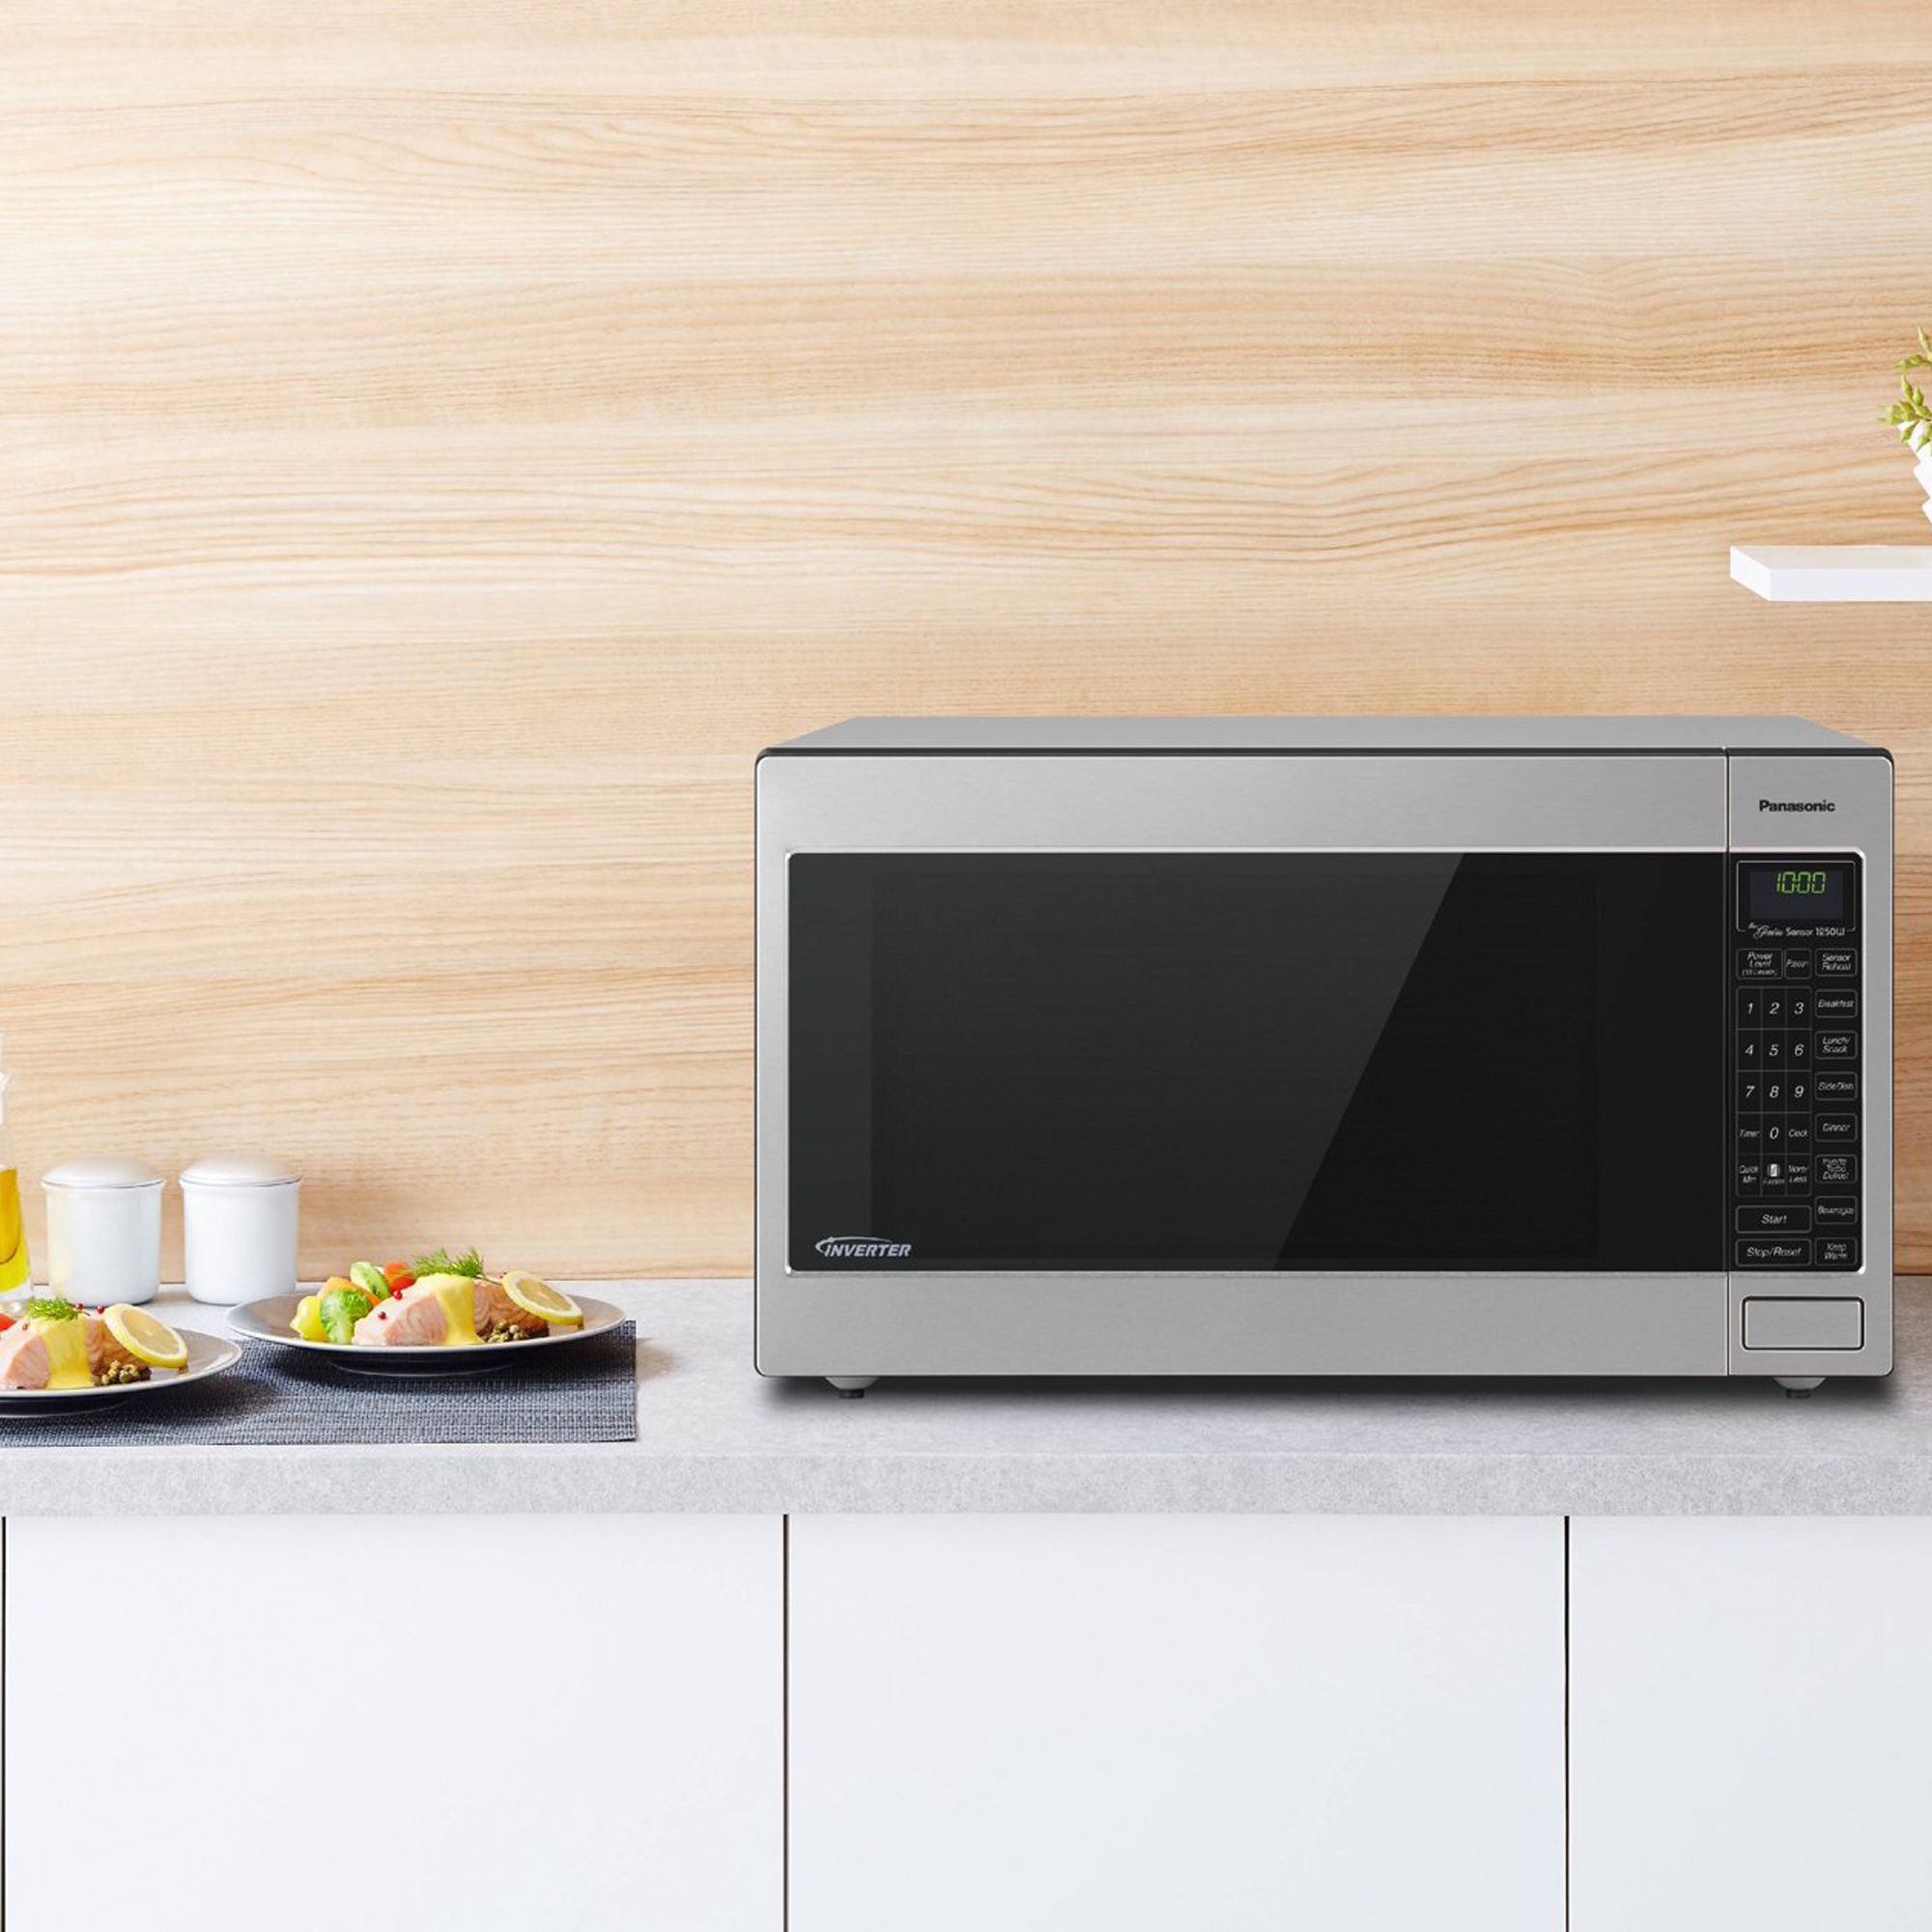 Panasonic 2.2 cu. ft. Stainless-Steel Microwave Oven With Inverter